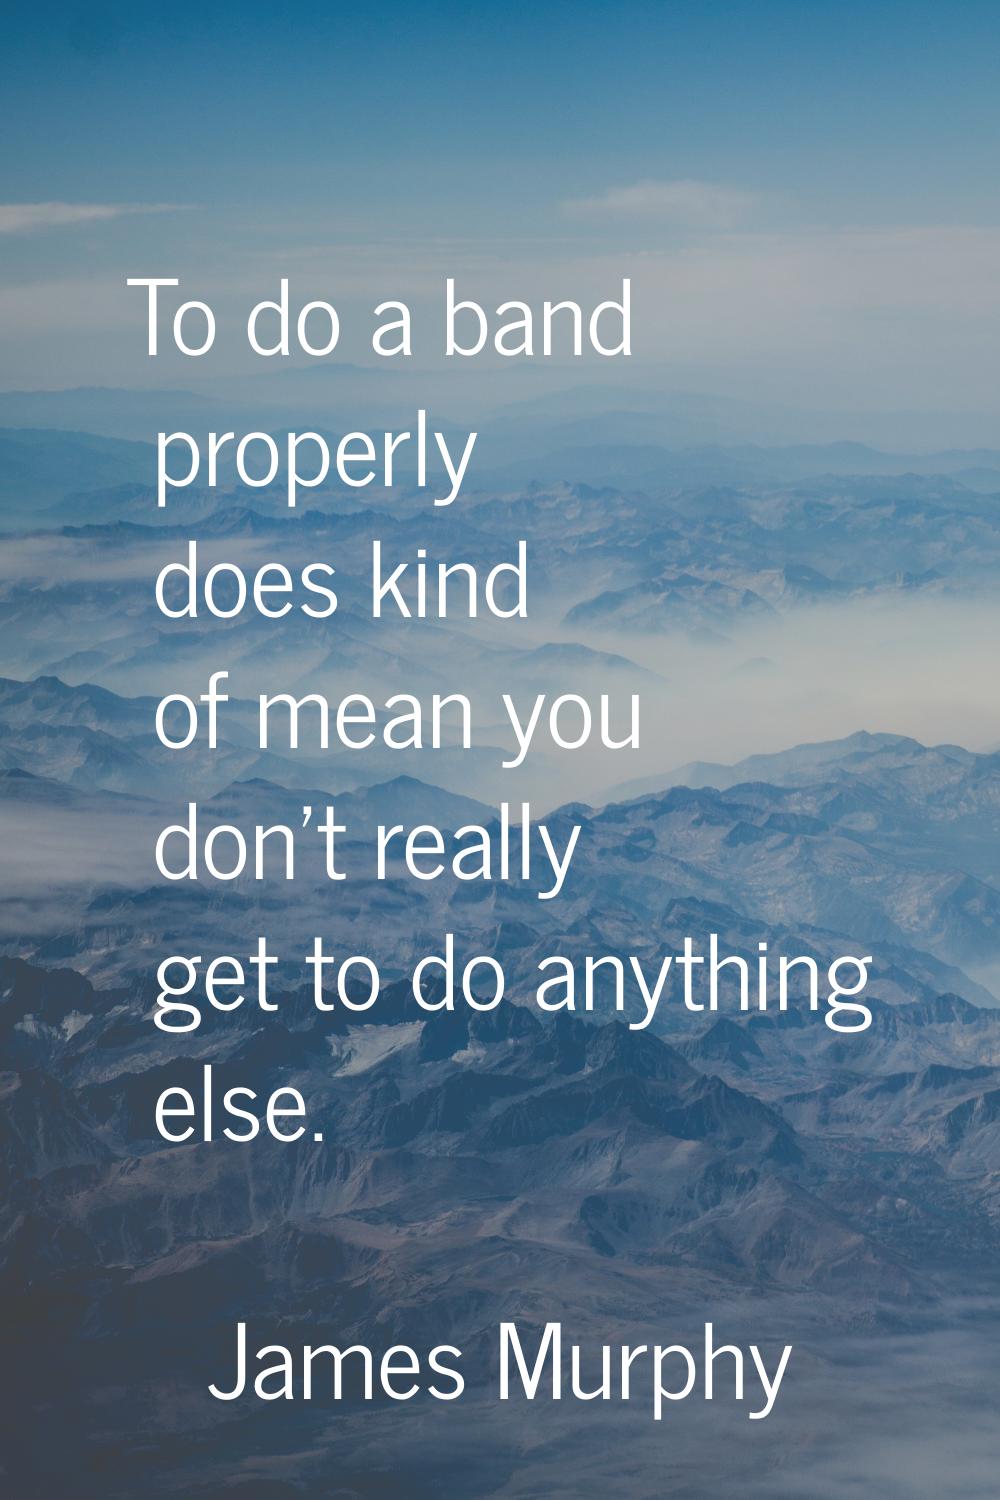 To do a band properly does kind of mean you don't really get to do anything else.